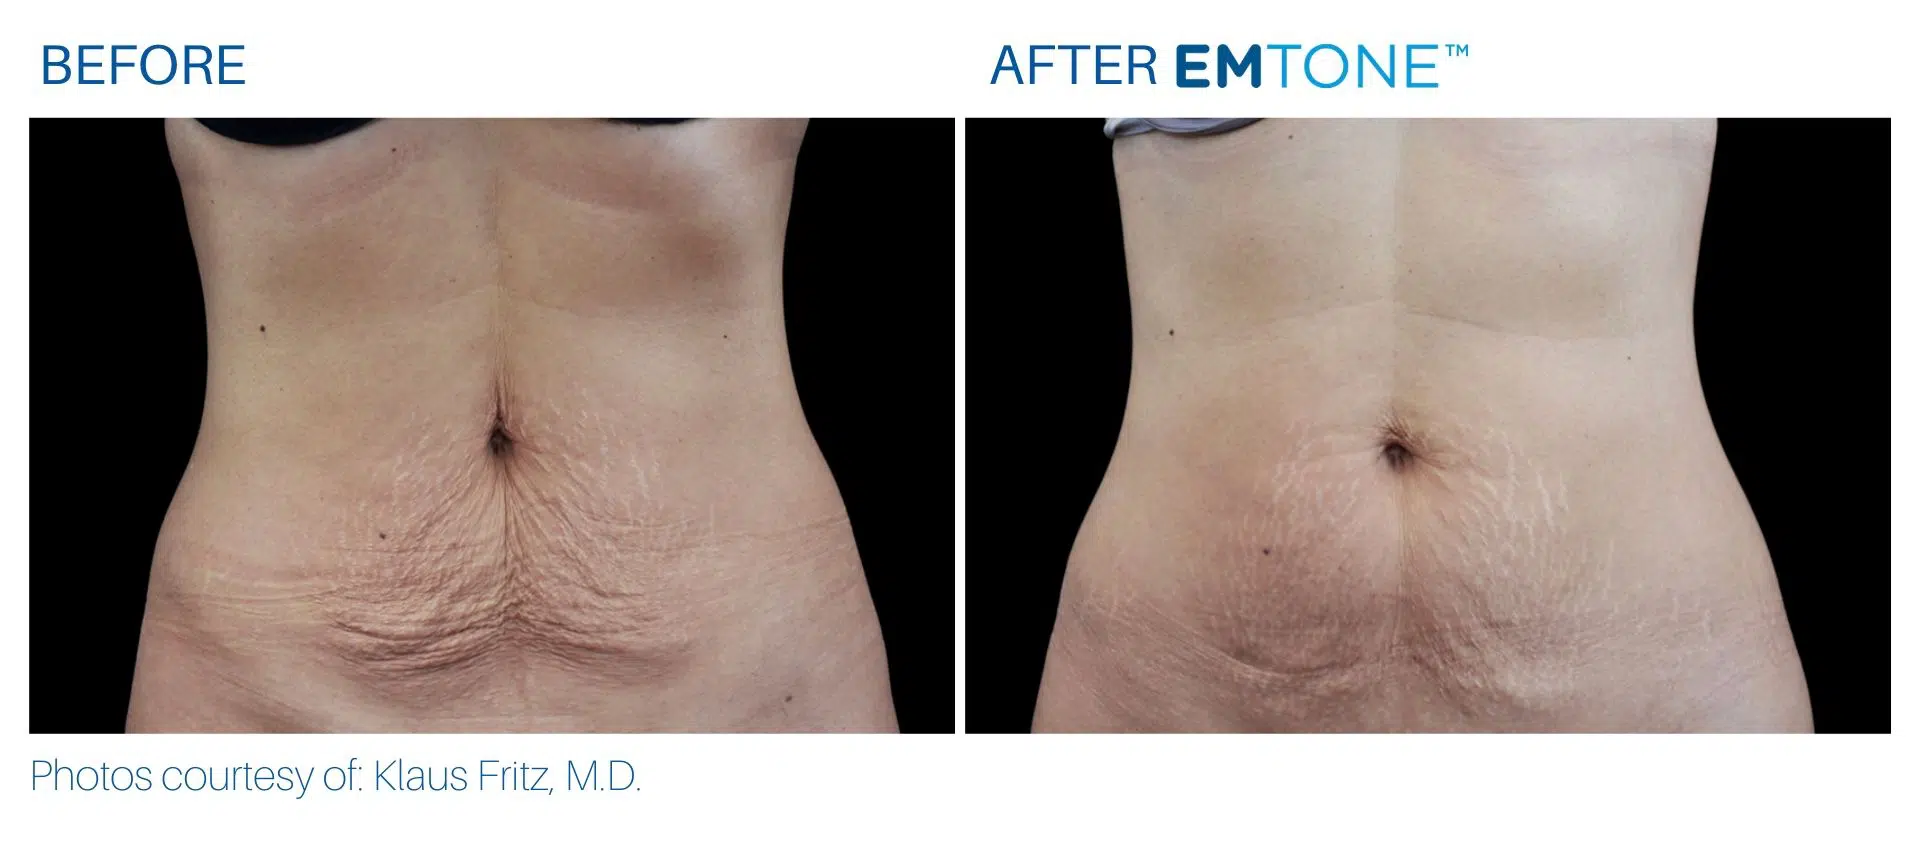 emtone cellulite treatment abdomen before and after at BodyMorphMD